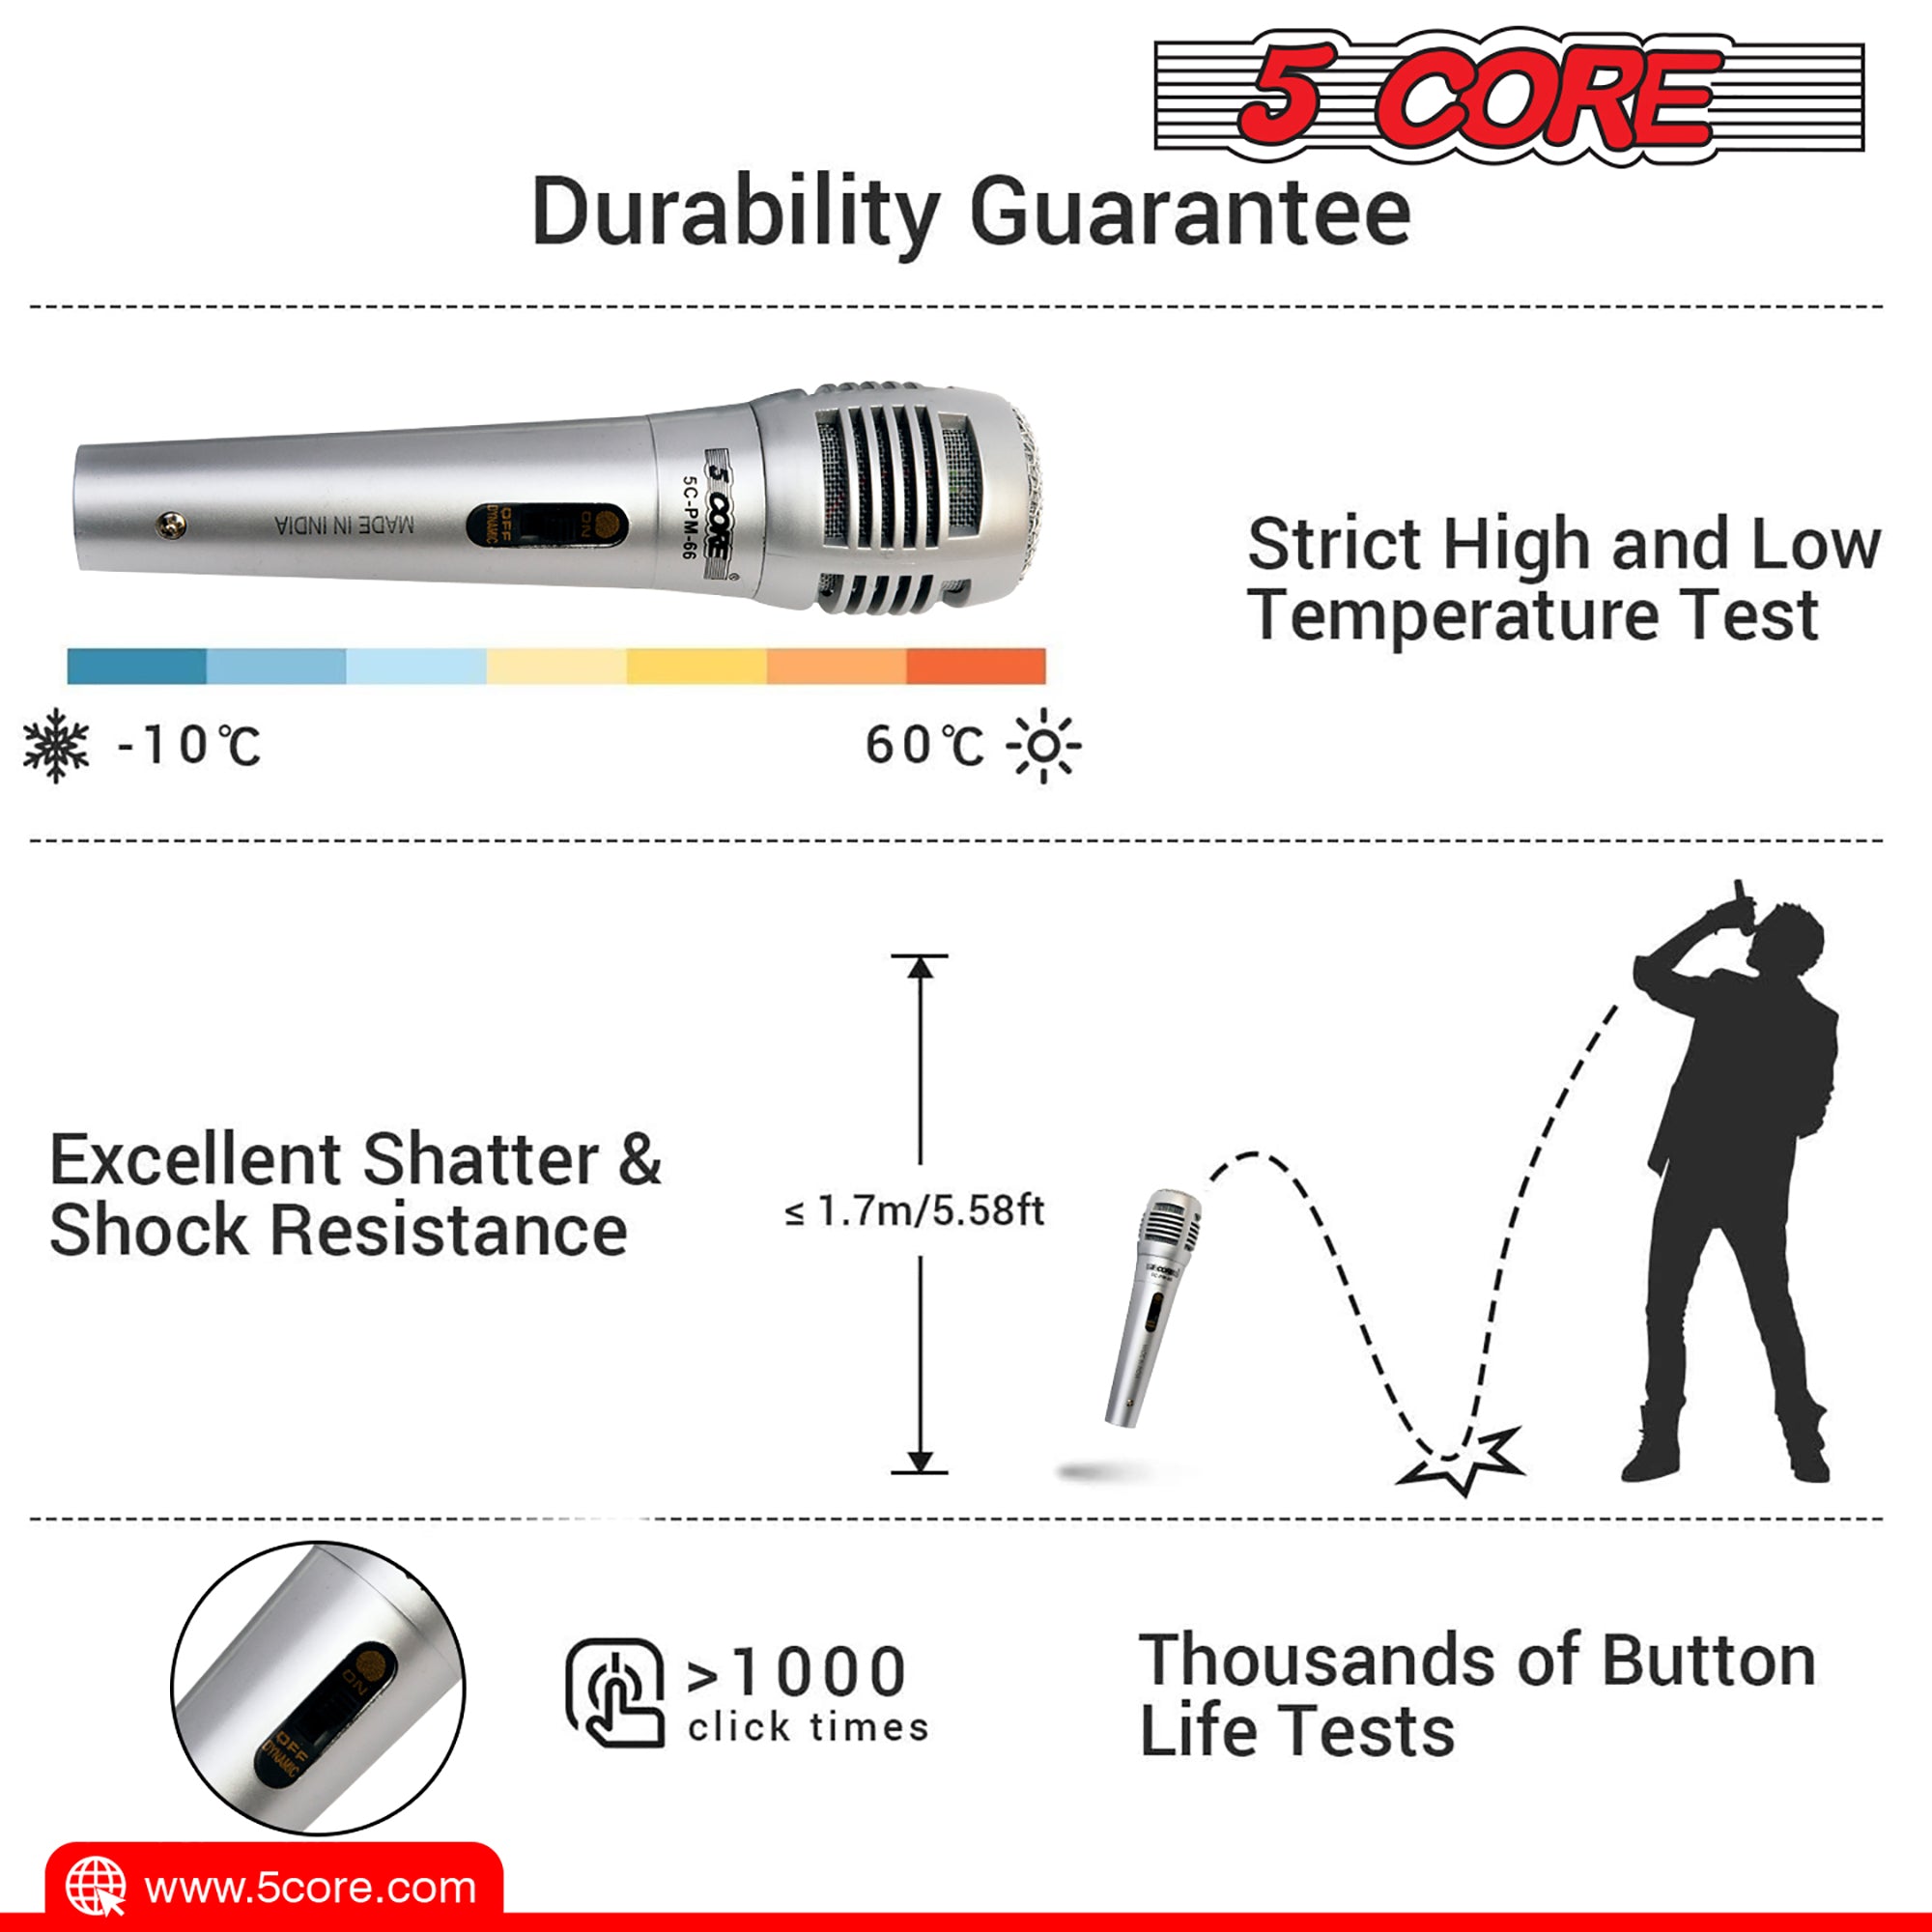 5 CORE 4 Pack Vocal Dynamic Cardioid Handheld Microphone Unidirectional Mic with 2 X 5ft Detachable XLR Cable to ¼ inch Audio Jack and On/Off Switch for Karaoke Singing (Silver) - PM-66k 2 pair